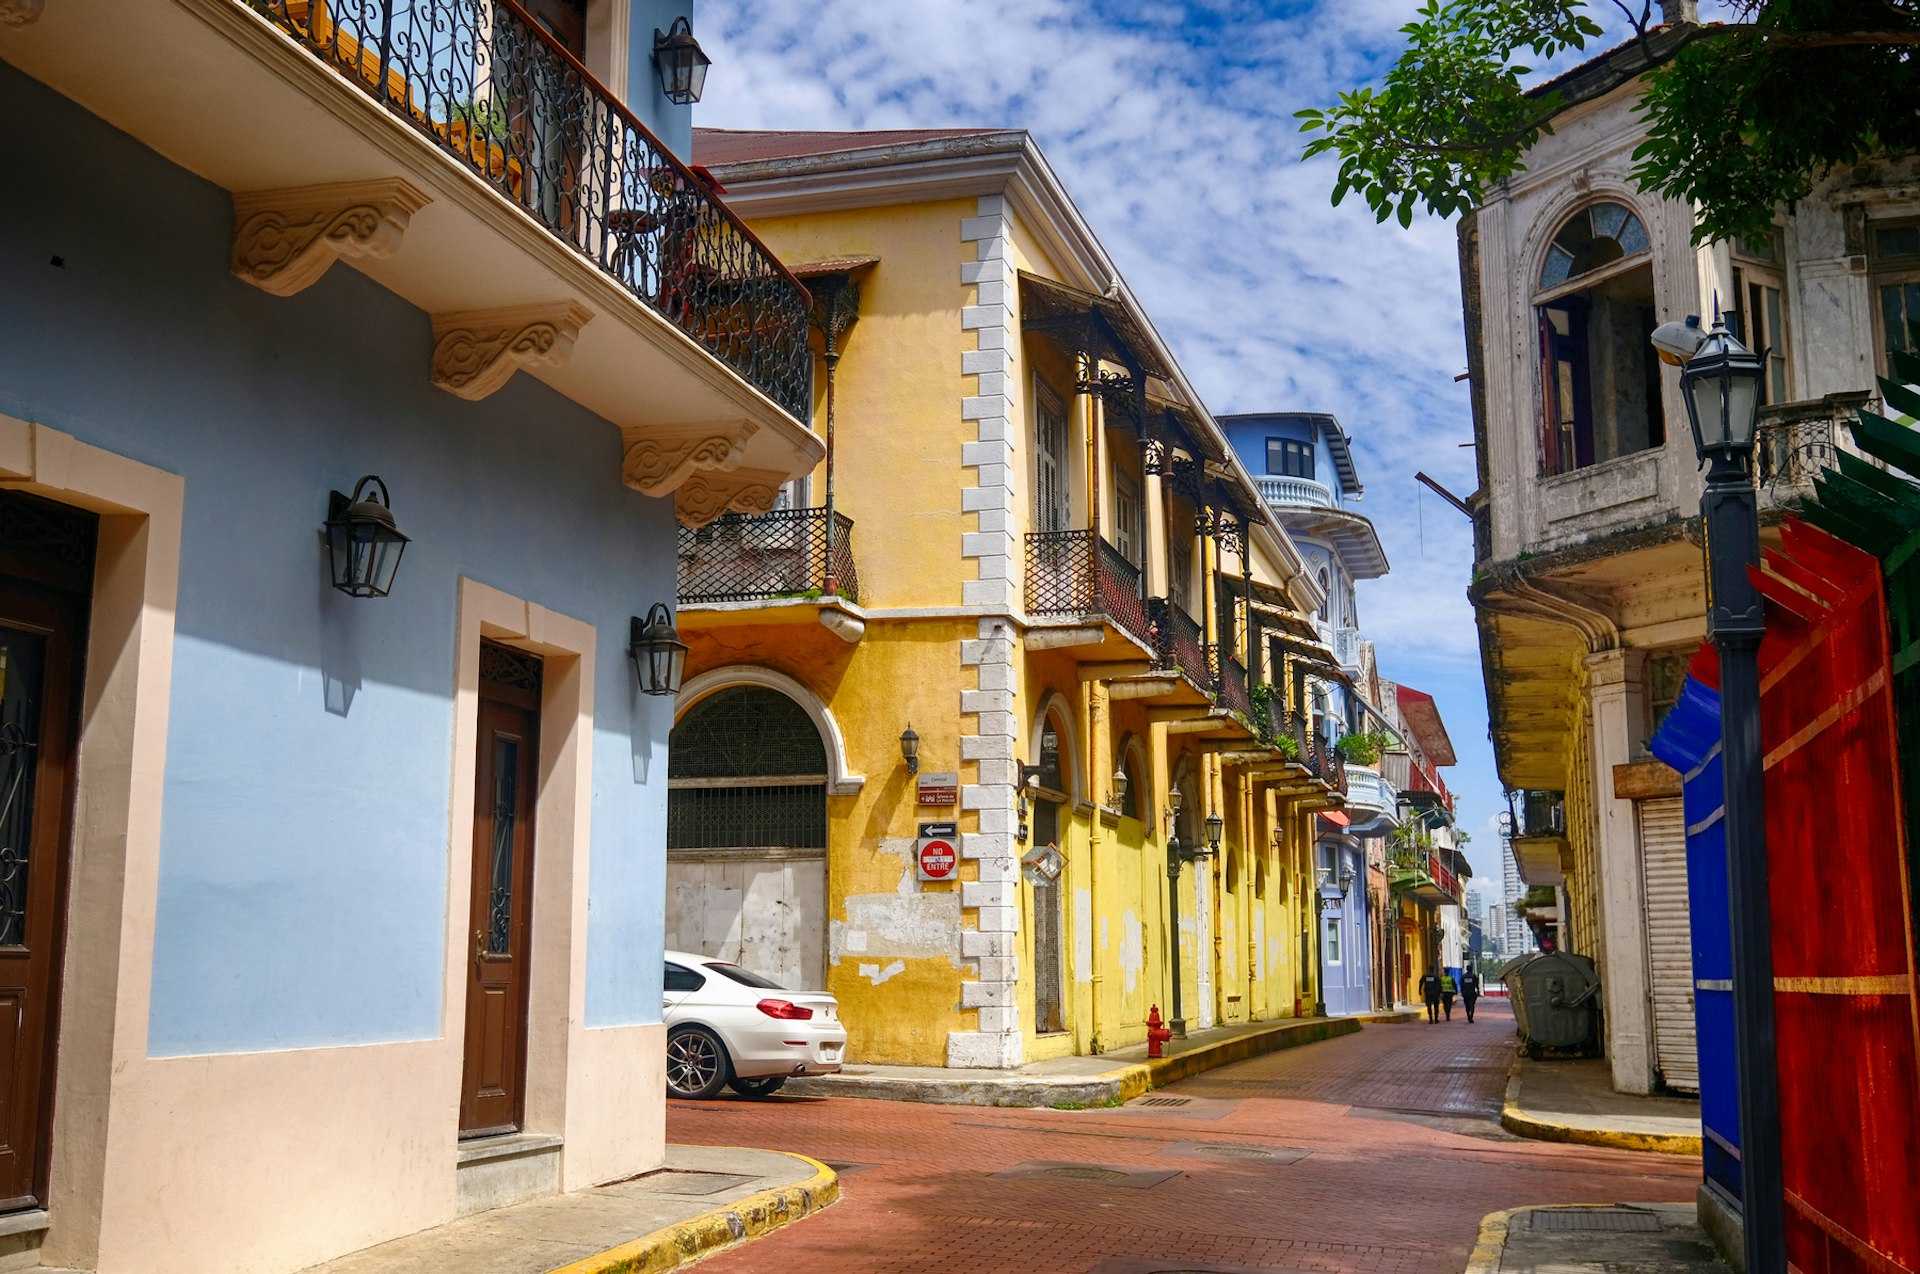 The old town of Panama City, lined with colorful buildings